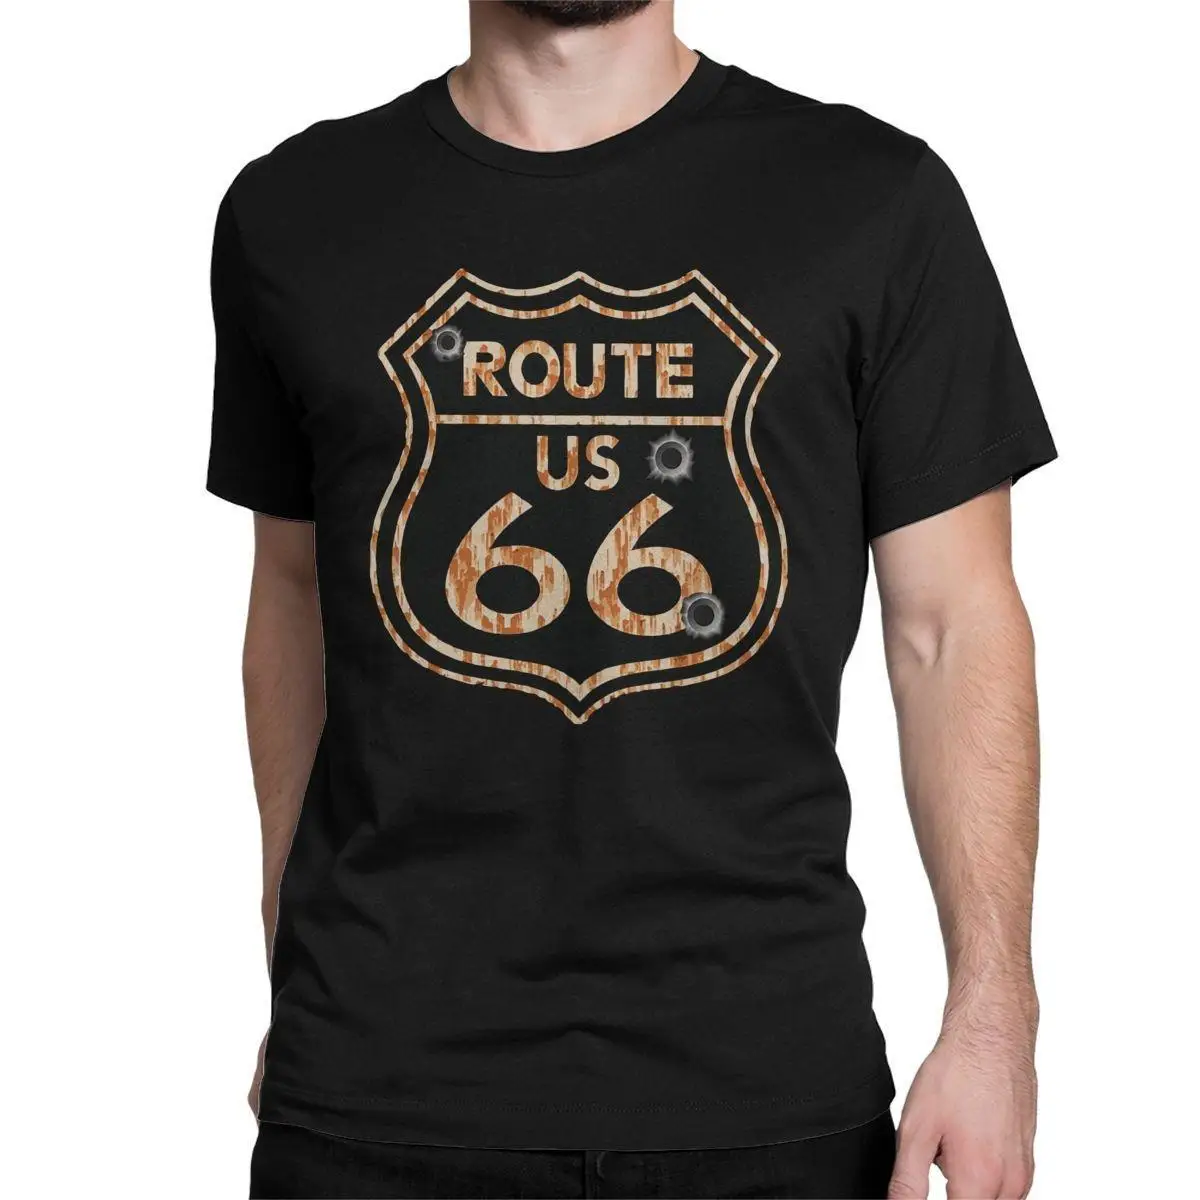 

Vintage Route 66 Sign Highway T Shirts for Men 100% Cotton Humorous T-Shirt Crew Neck Tees Short Sleeve Clothes Party